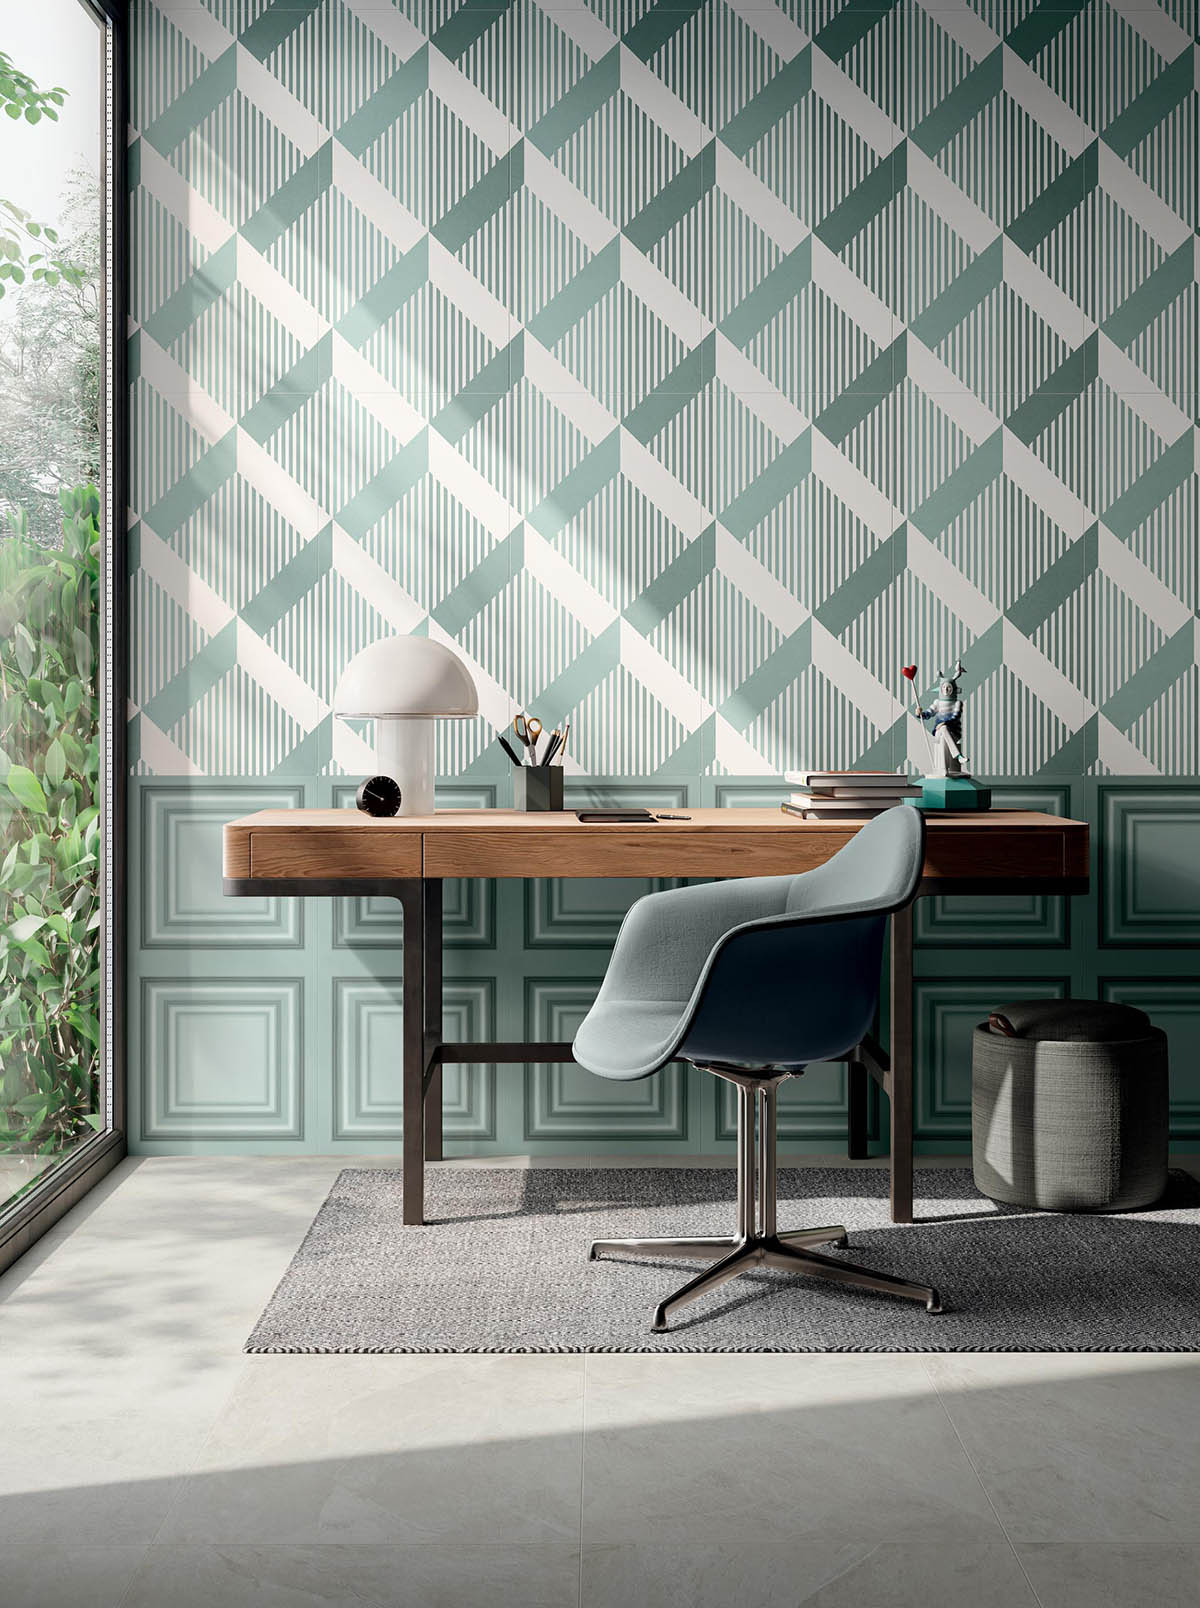 Characterized by bold geometric shapes and decadent details, deco tiles feature chevron patterns, arches of contrasting marble, and scallops full of color. 